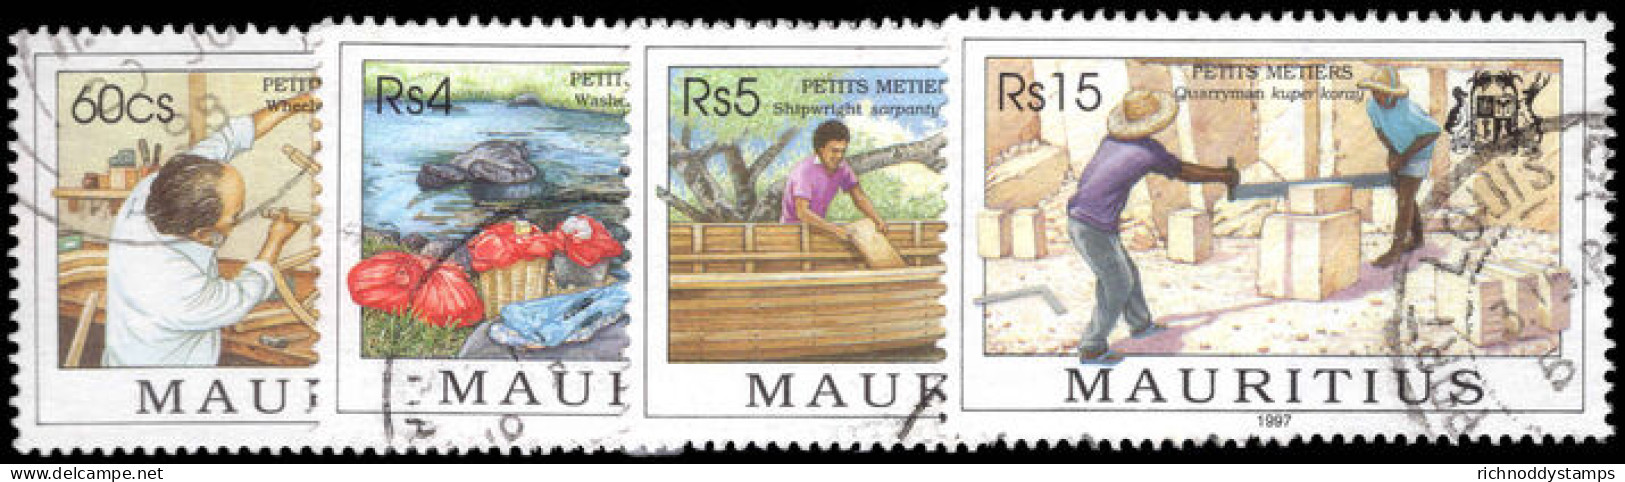 Mauritius 1997 Small Businesses Fine Used. - Maurice (1968-...)